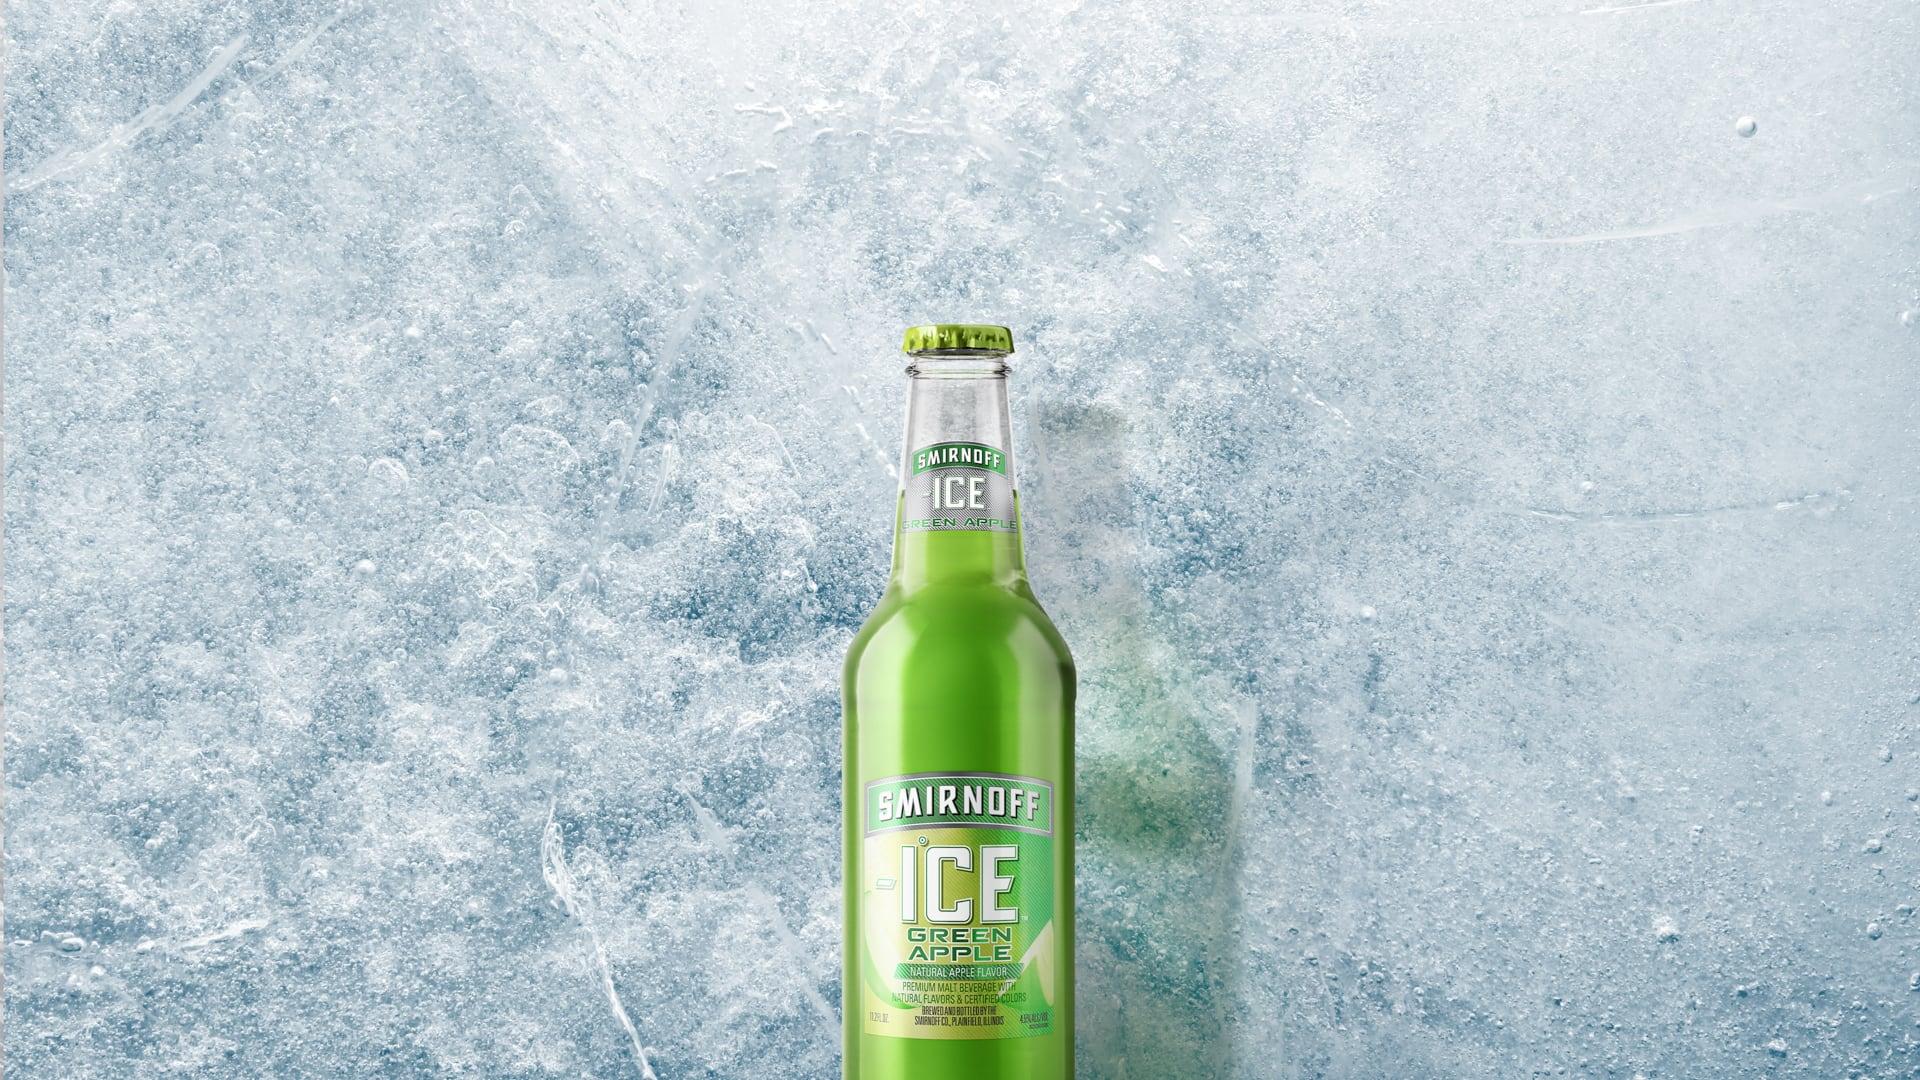 Smirnoff Ice Green Apple on a Icy background